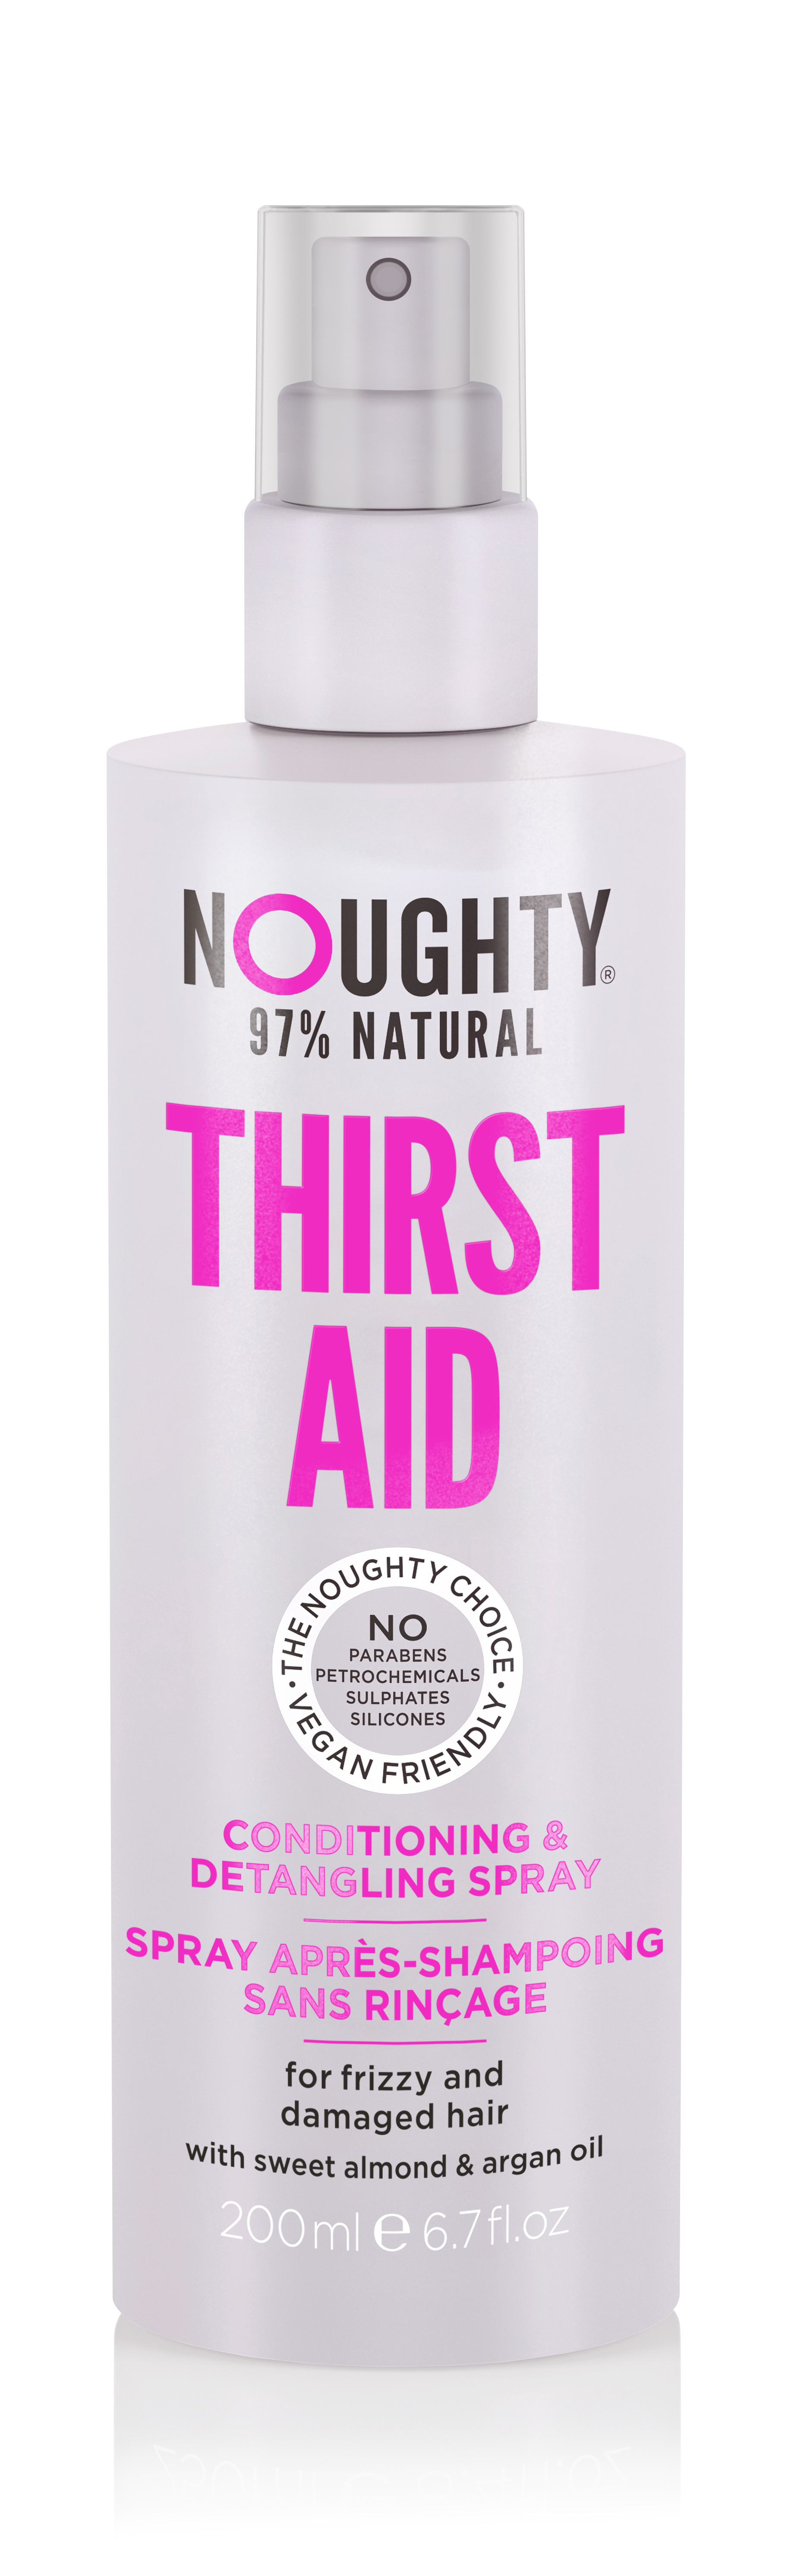 Noughty Thirst Aid Conditioning Detangling Spray